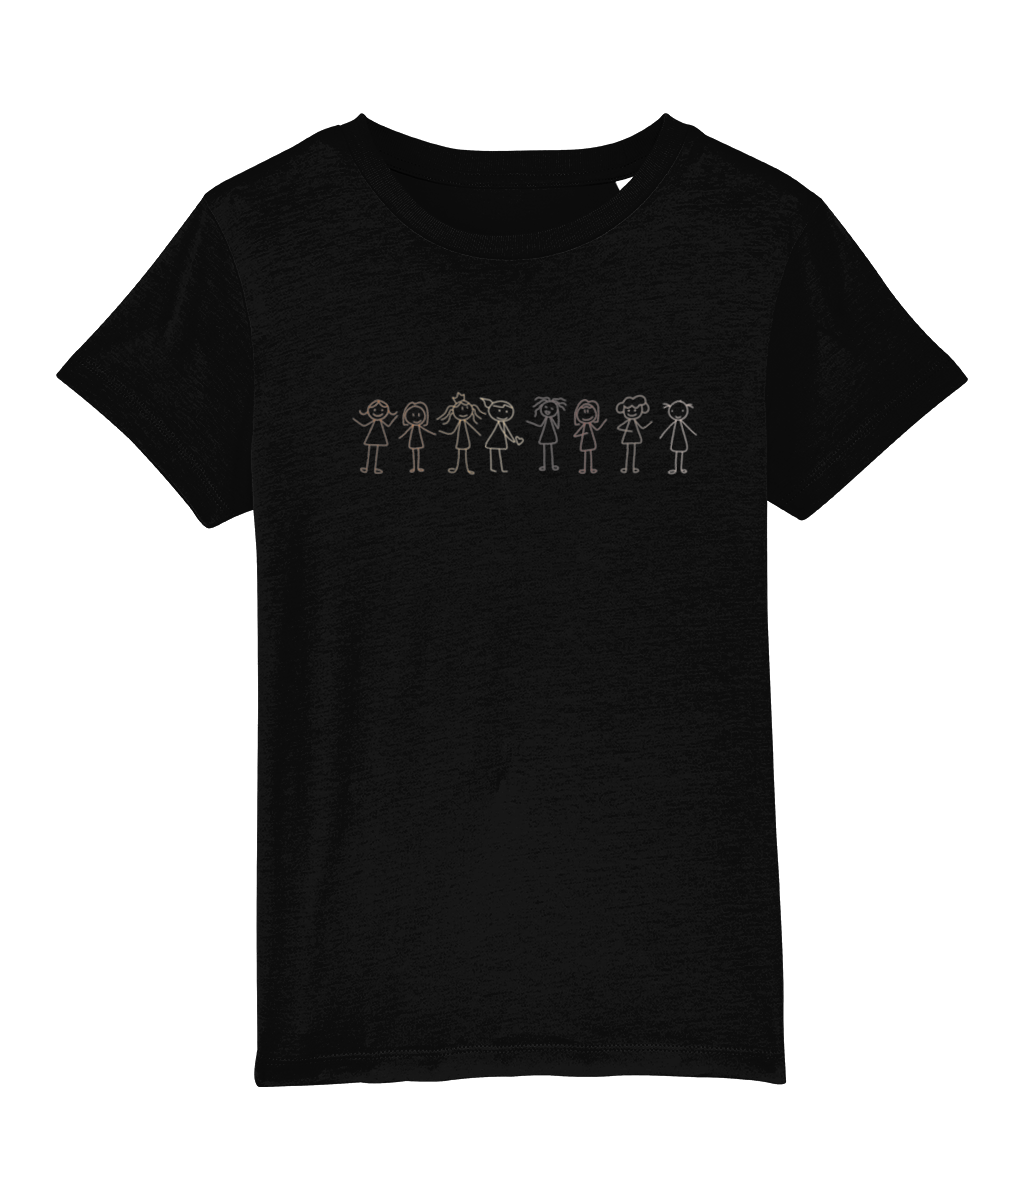 Be Friends Girls Organic Cotton T Shirts - Buy any 3 get 10% off